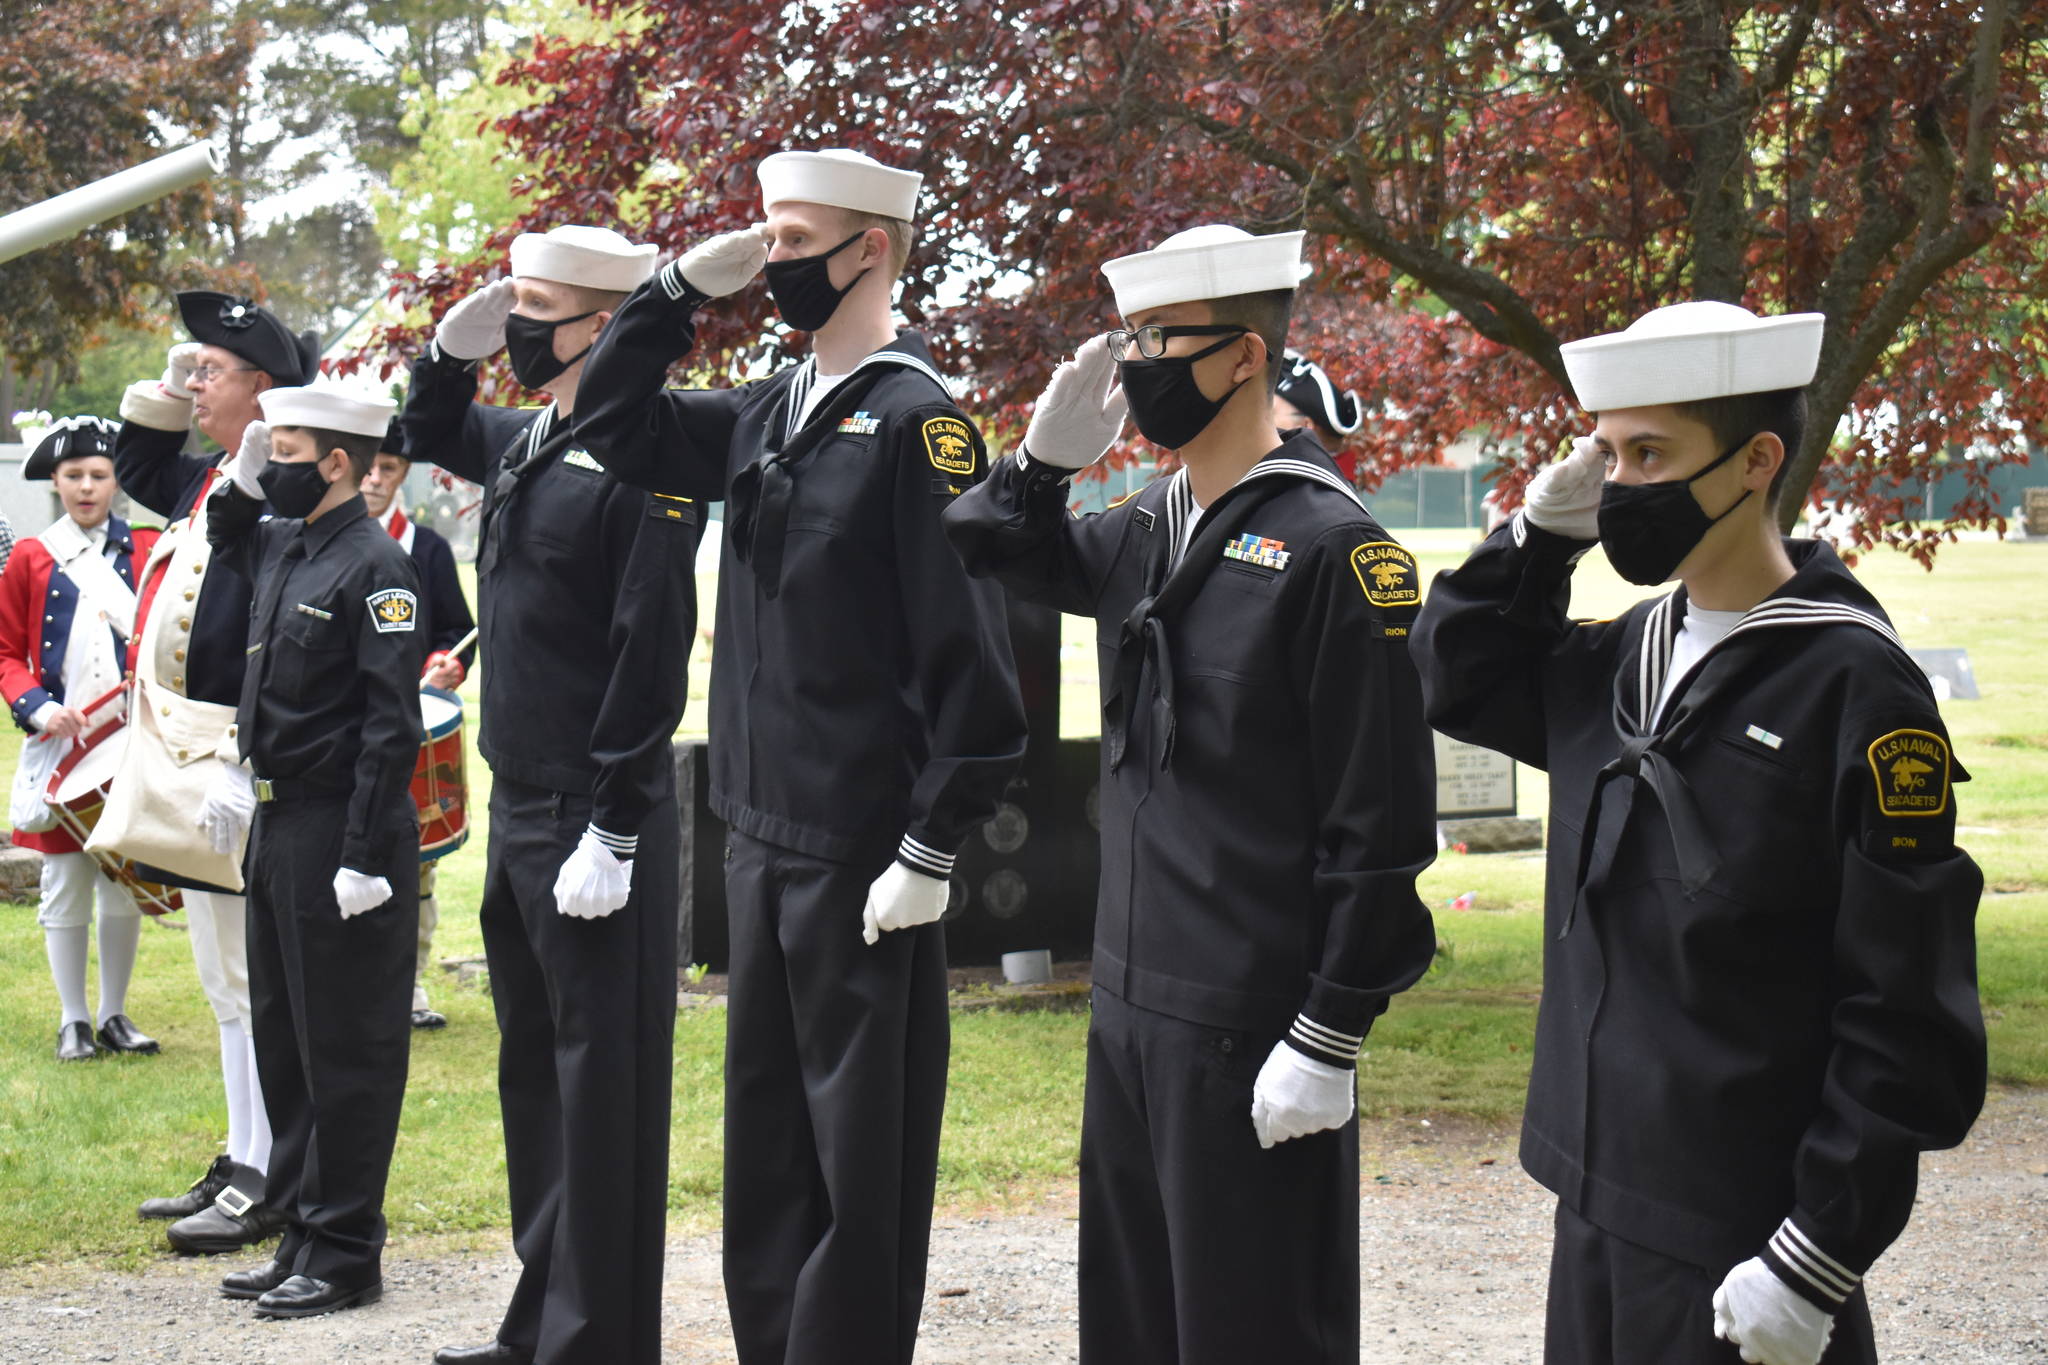 Photo by Emily Gilbert/Whidbey News-Times
Members of the Orion squadron of the Navel Sea Cadets, right, will participate in a flag retirement ceremony at Maple Leaf Cemetery on Saturday. The event will stream online and air on channel 10.